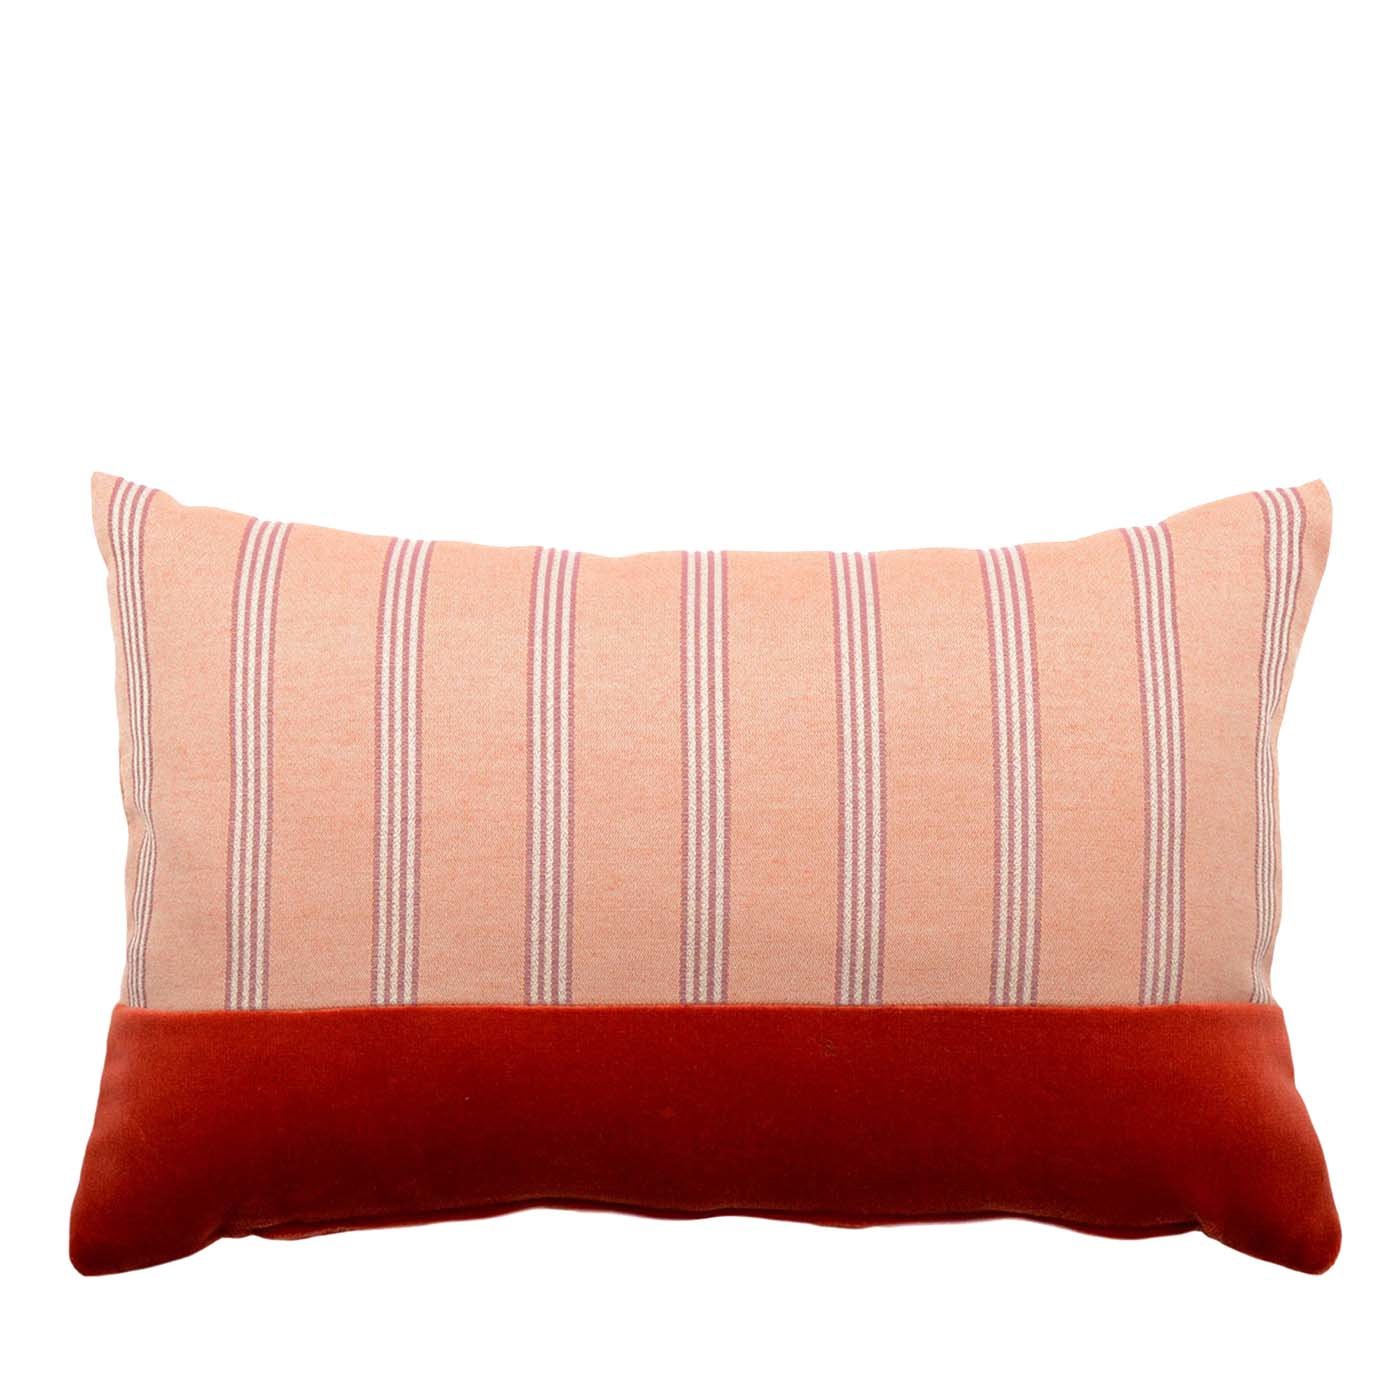 Rectangular Simple Orizzontal Cushion in striped jaquard fabric - Main view